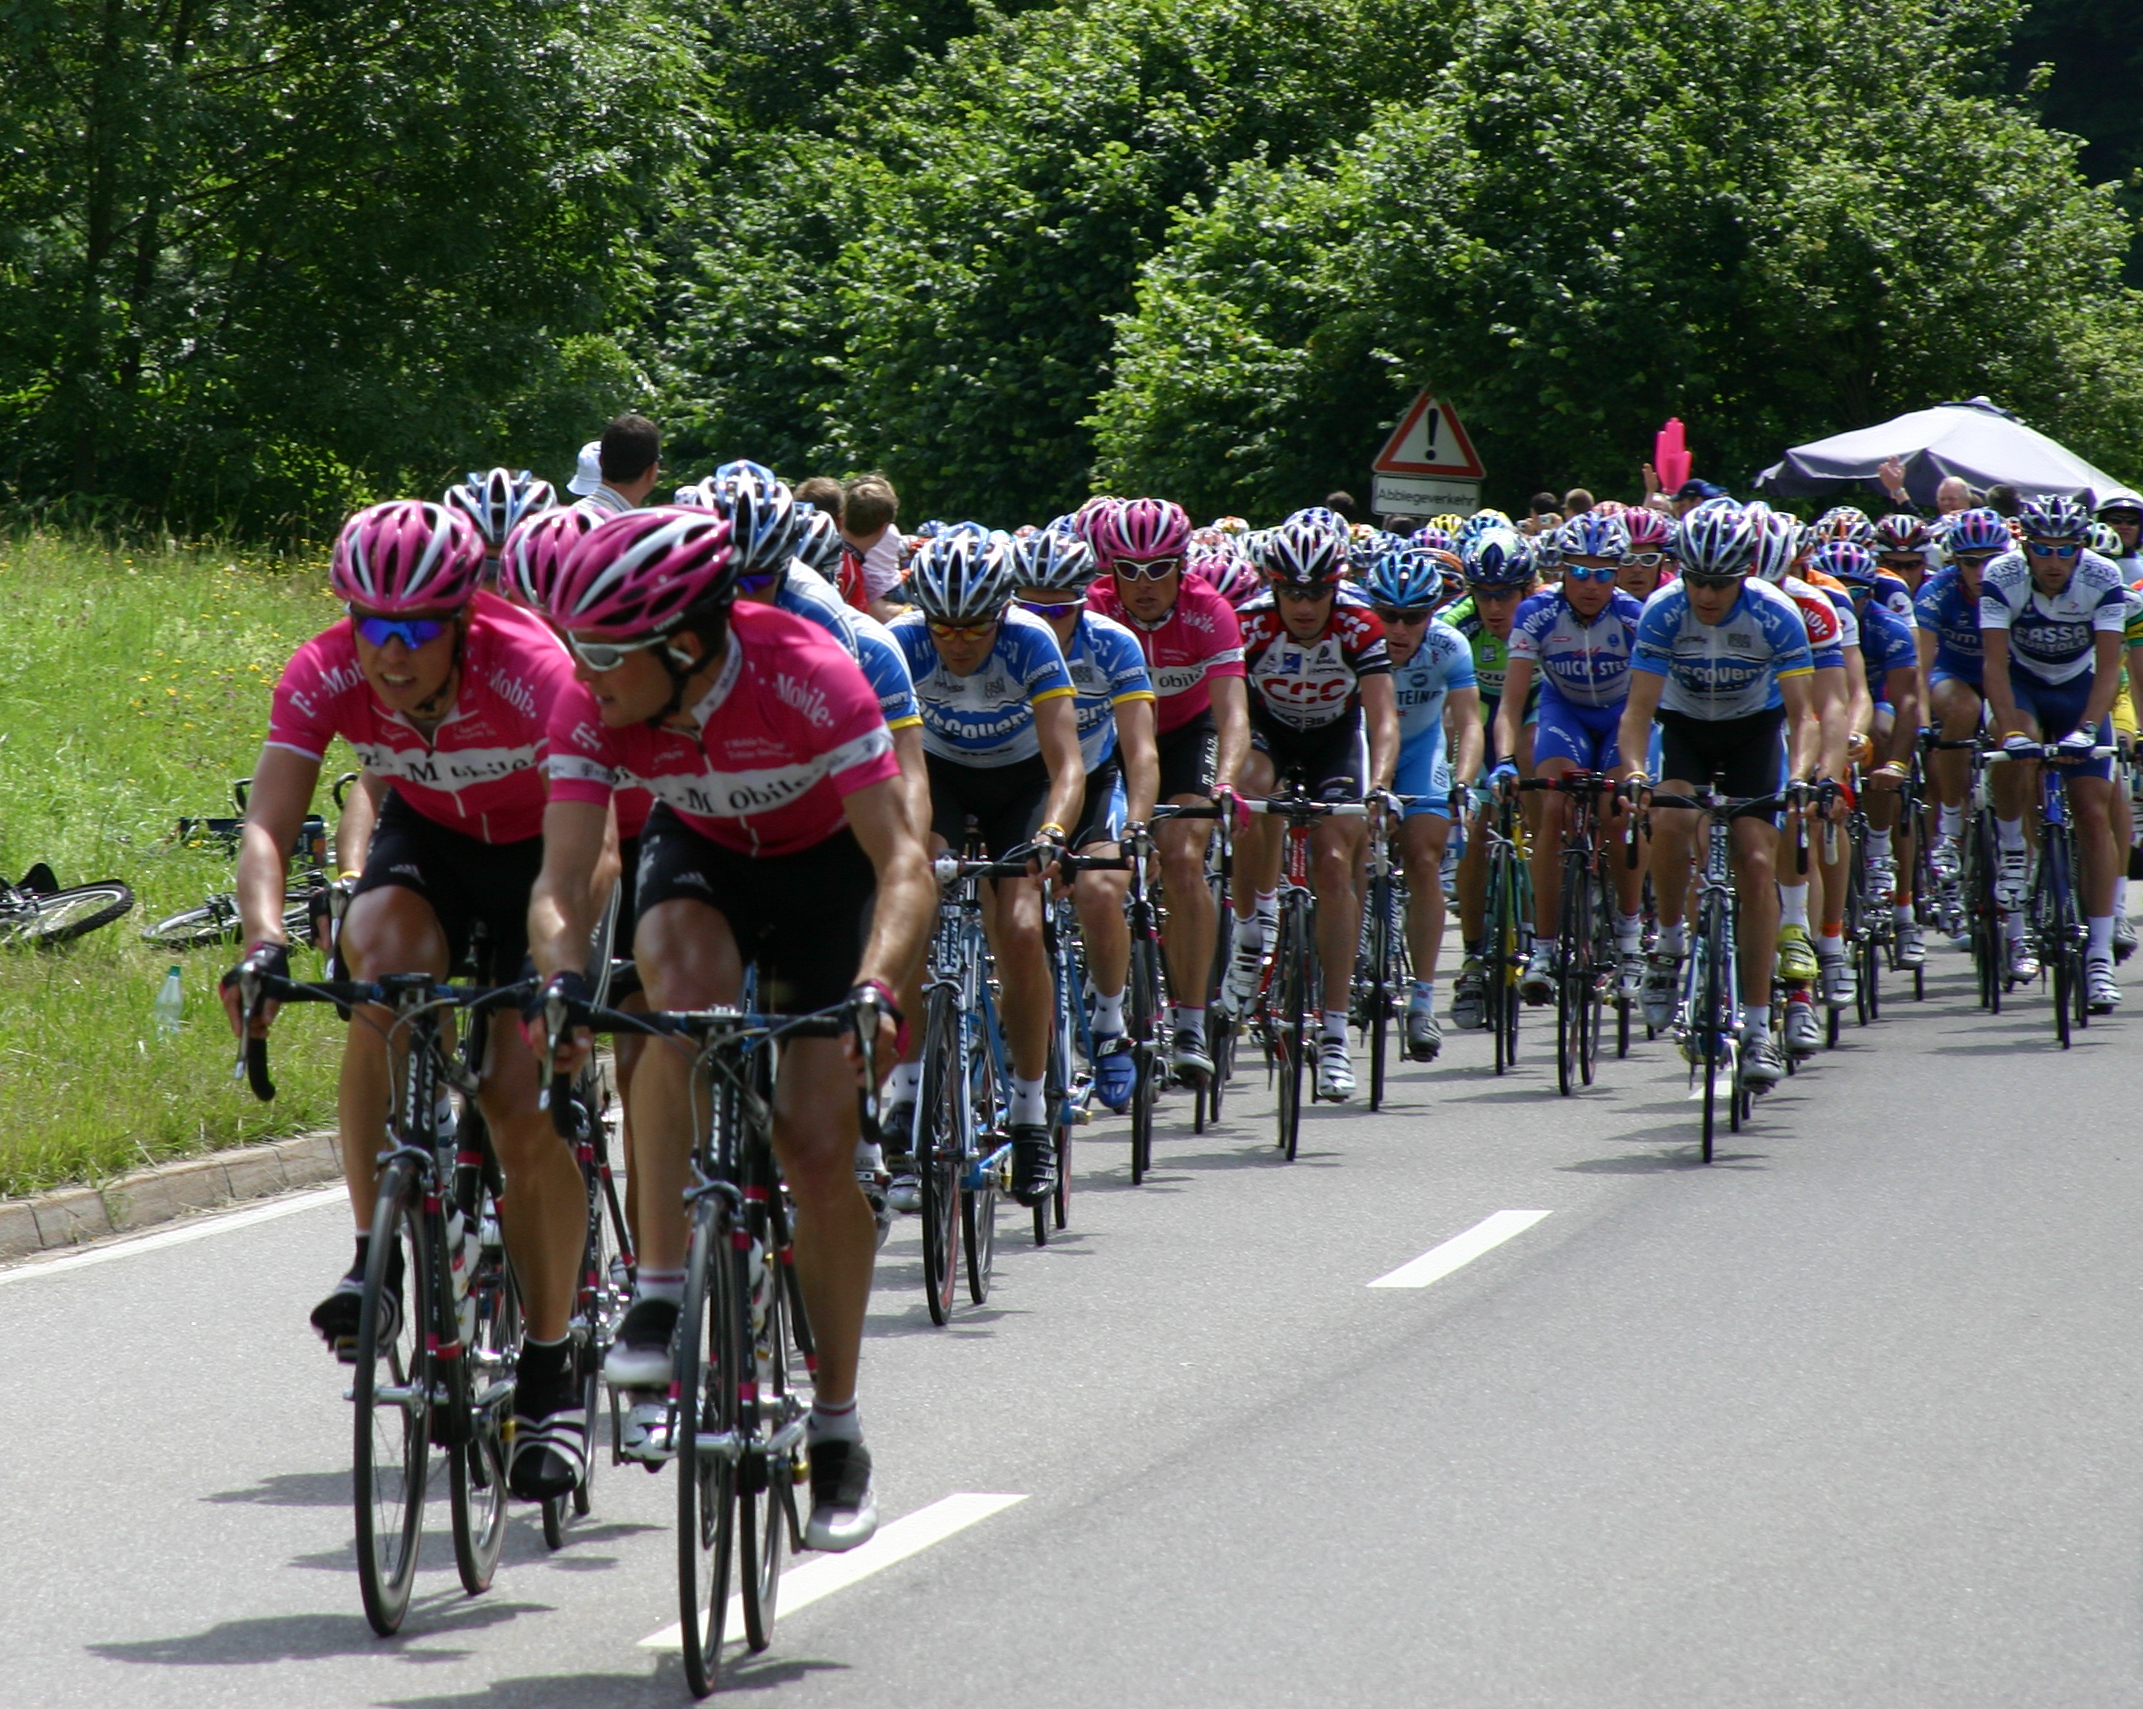 National sports of Belgium - Cycling